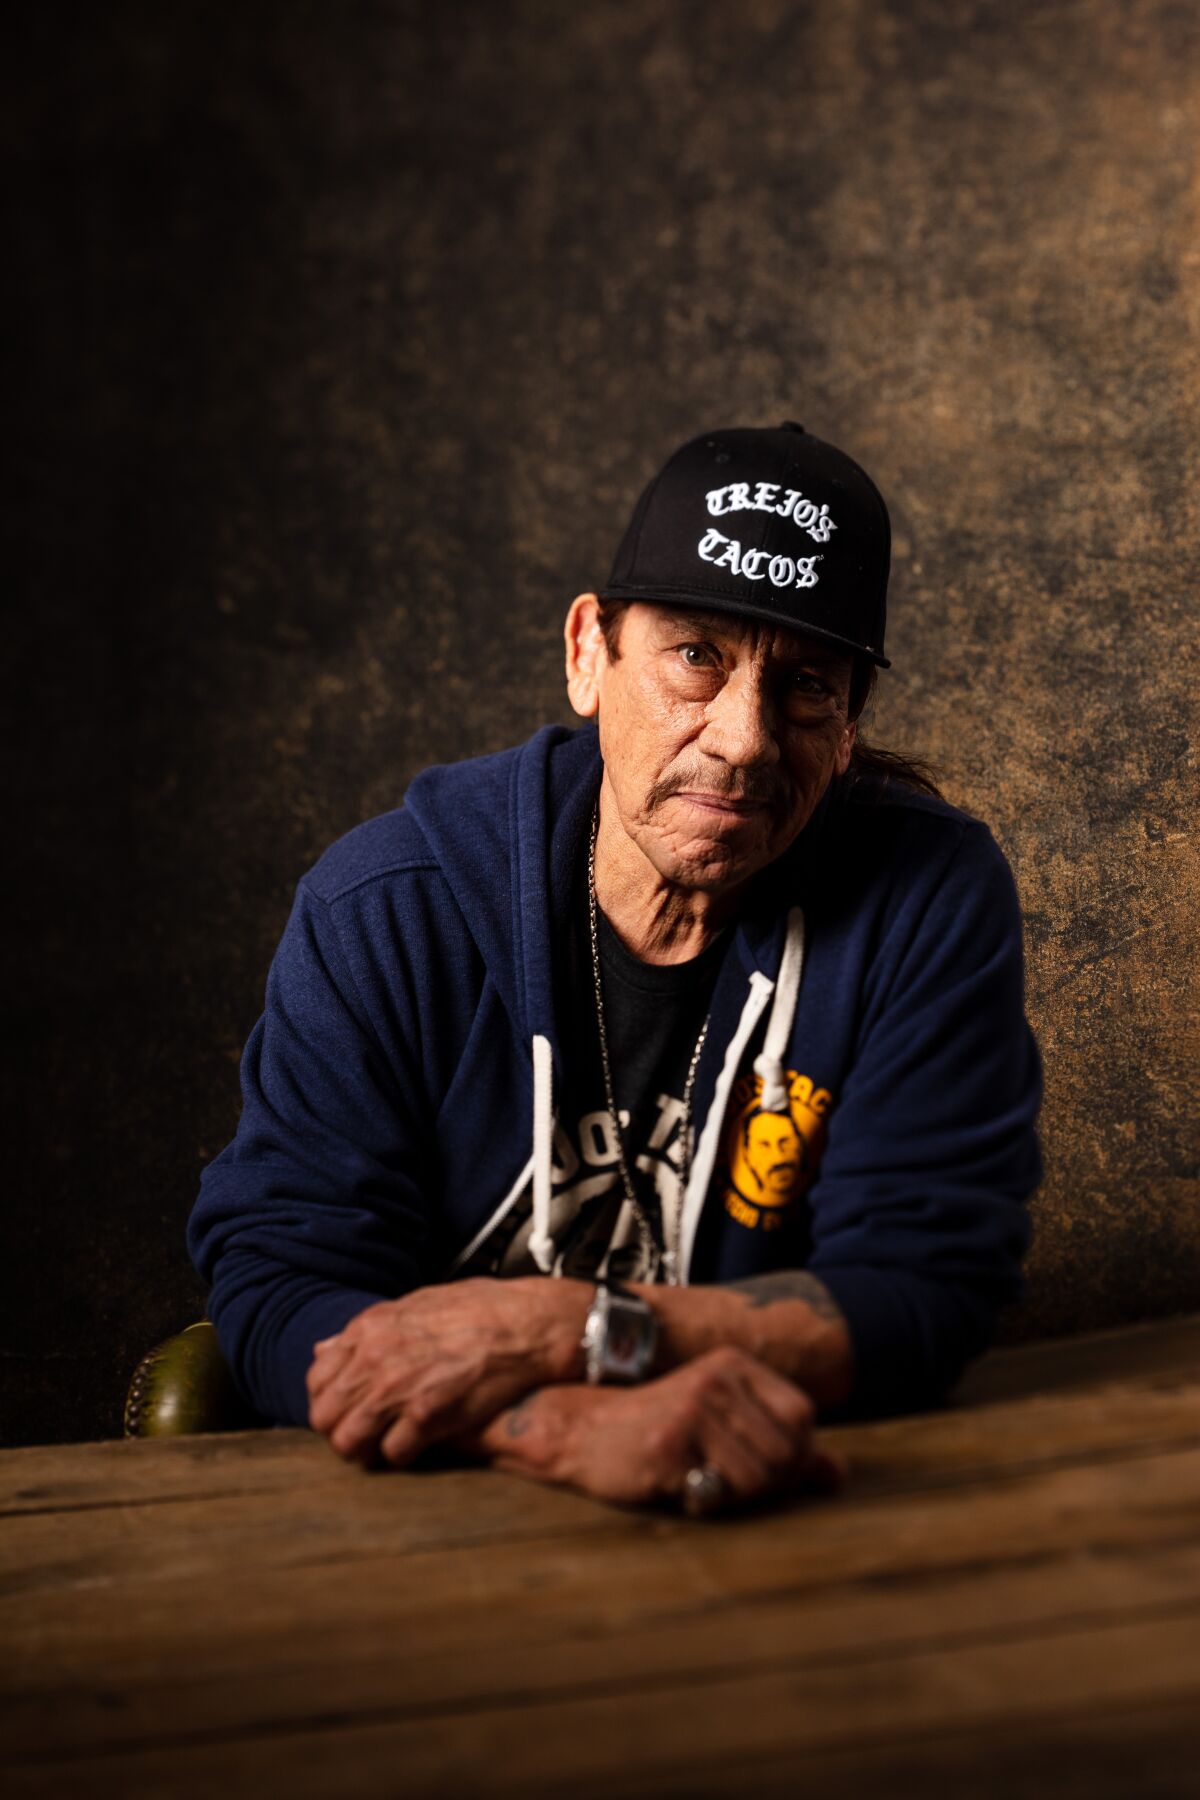 Danny Trejo, actor and author of "Trejo: My Life of Crime, Redemption, and Hollywood"